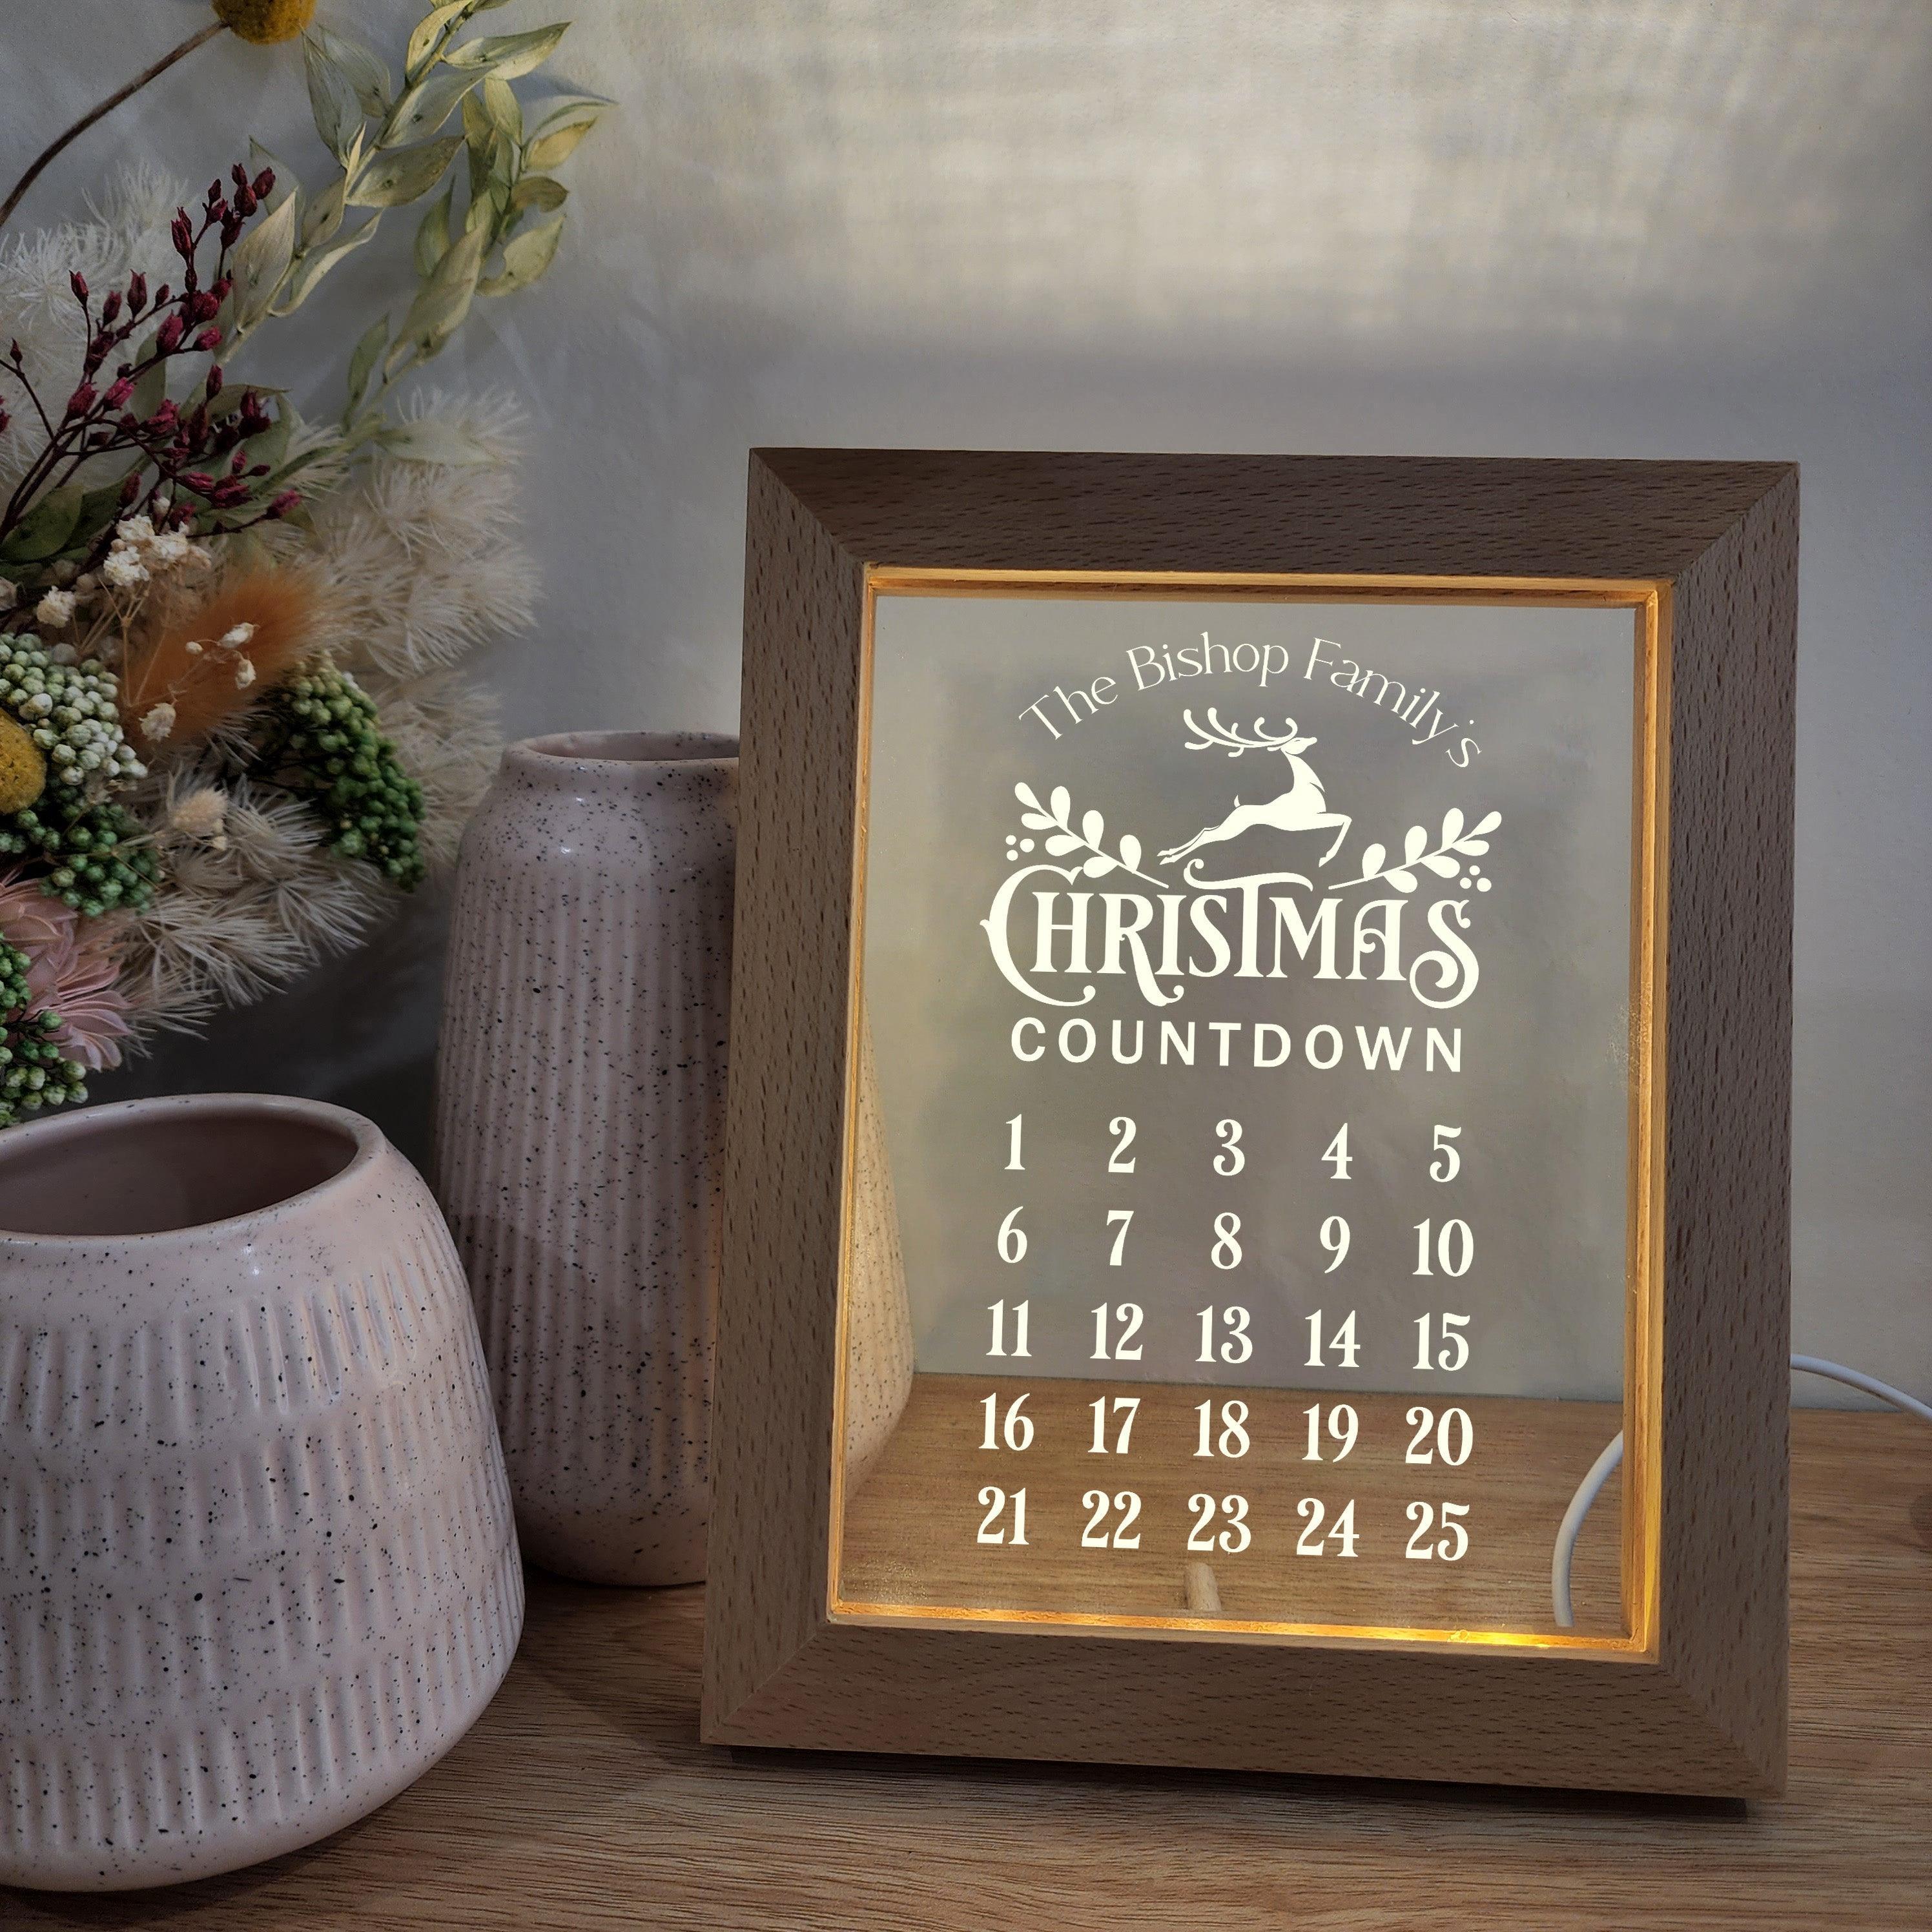 Timber Christmas Countdown Night Light Frame 🌙 - Personalised Family Christmas Countdown - The Willow Corner